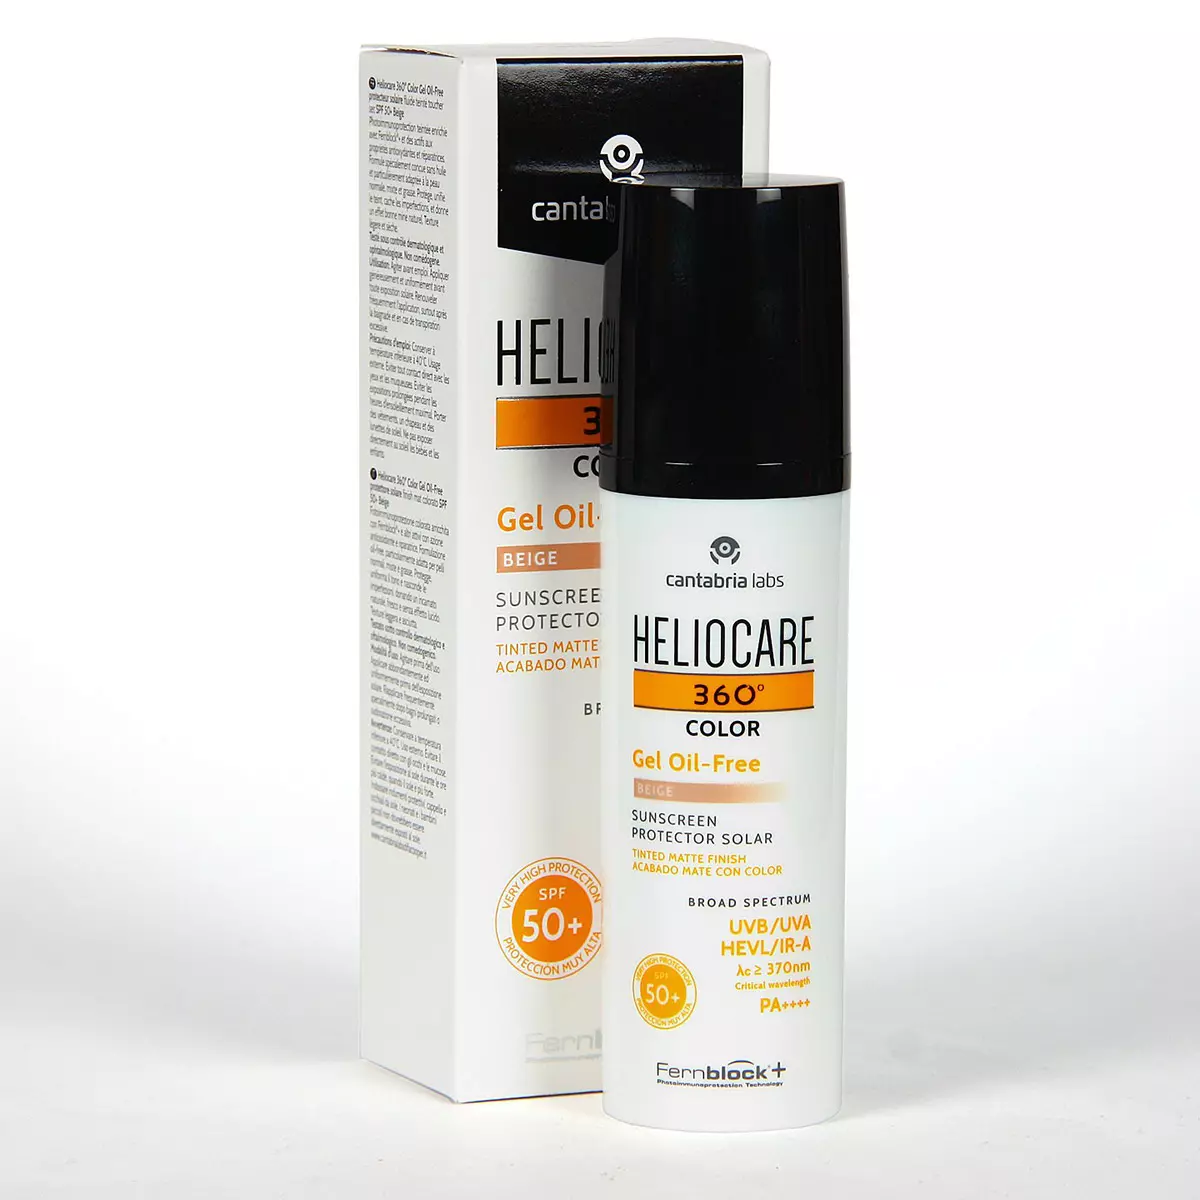 Heliocare 360 color gel oil free beige